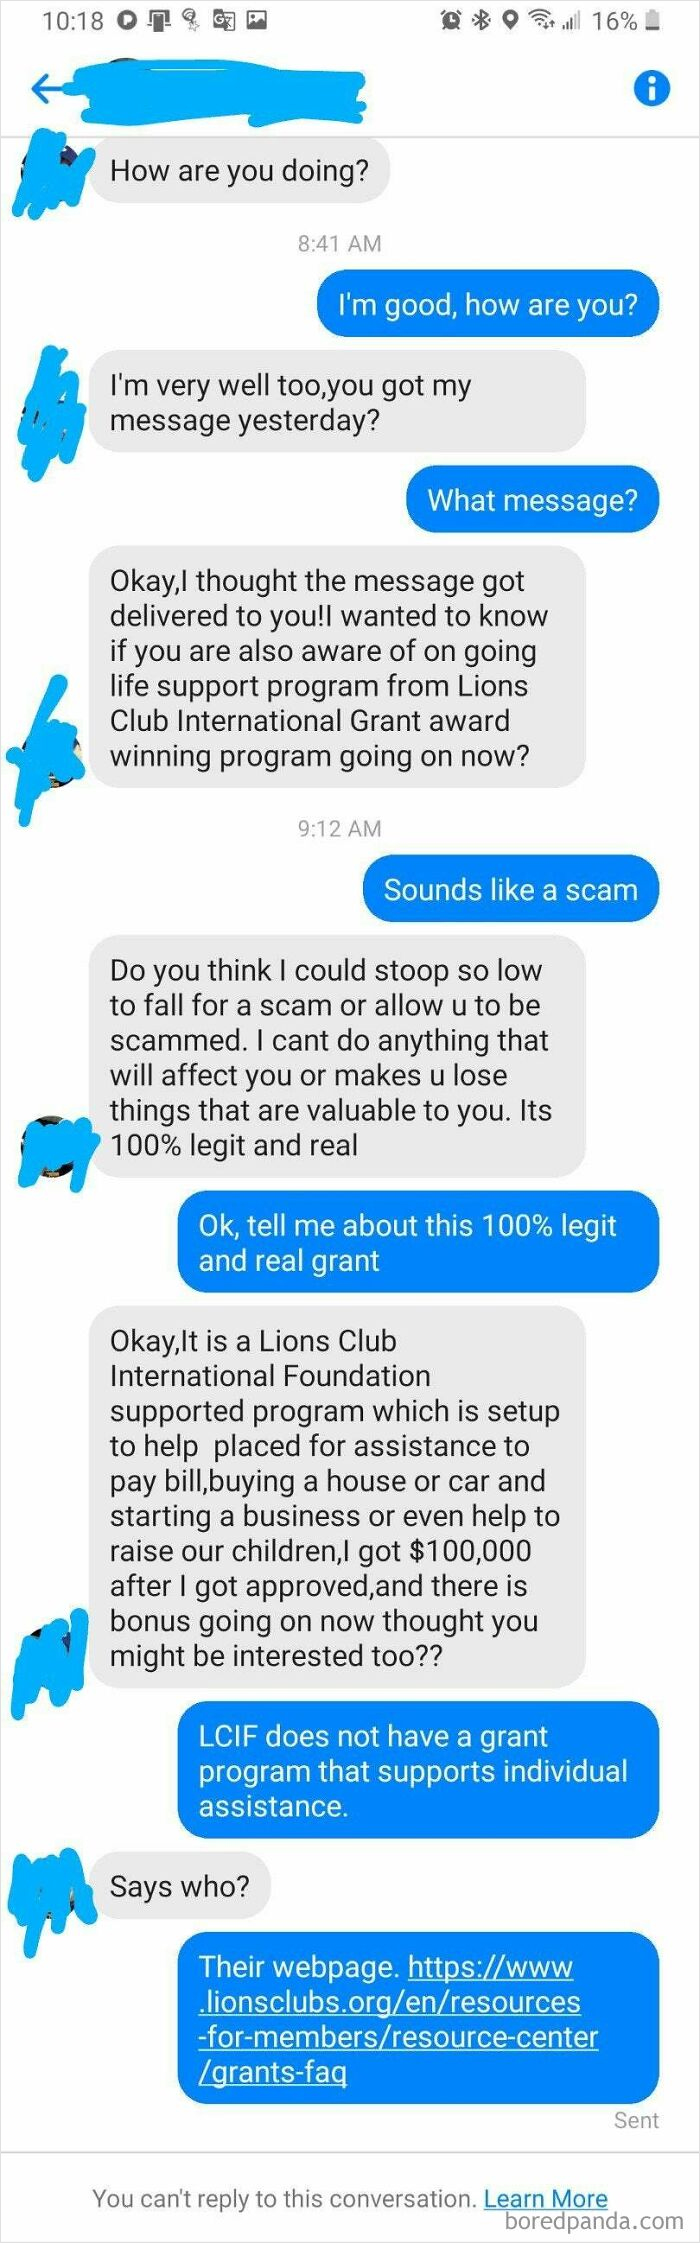 An Old Co-Worker Messaged Me. Got Blocked Lol